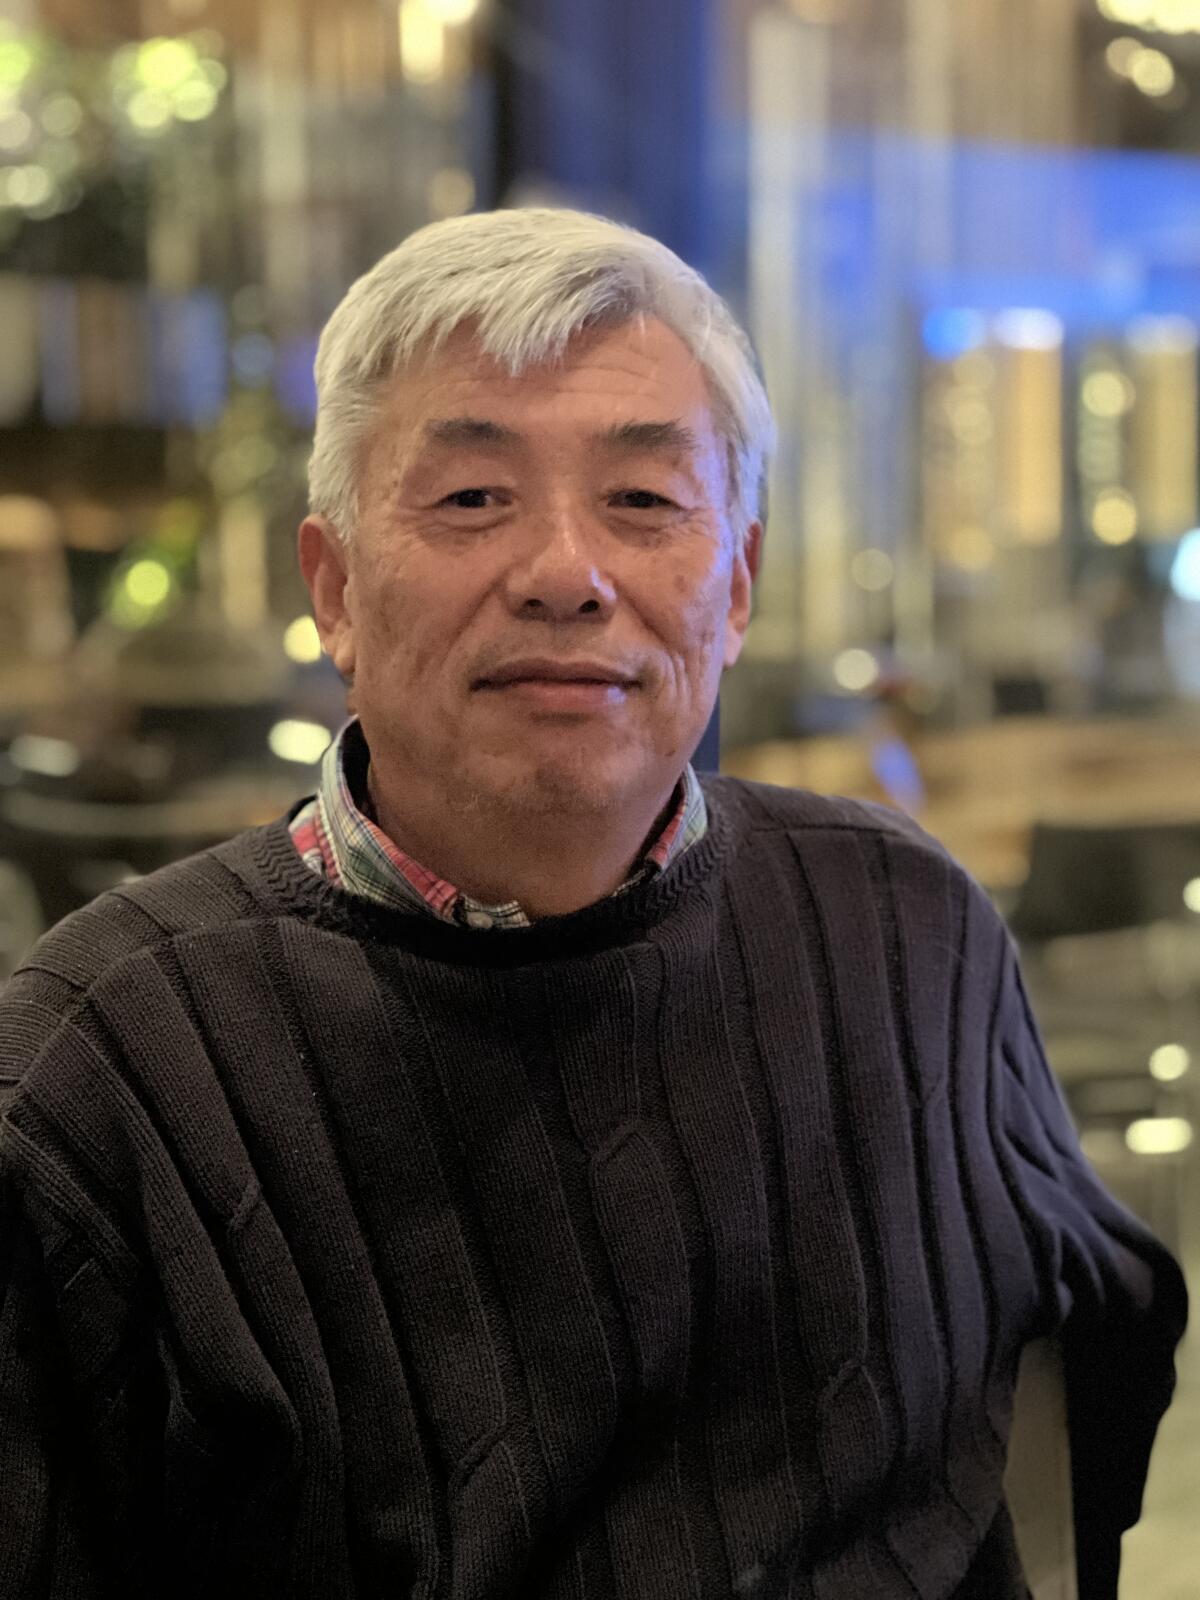 Xiang-Dong Fu contends he was forced to resign from UC San Diego after 30 years.